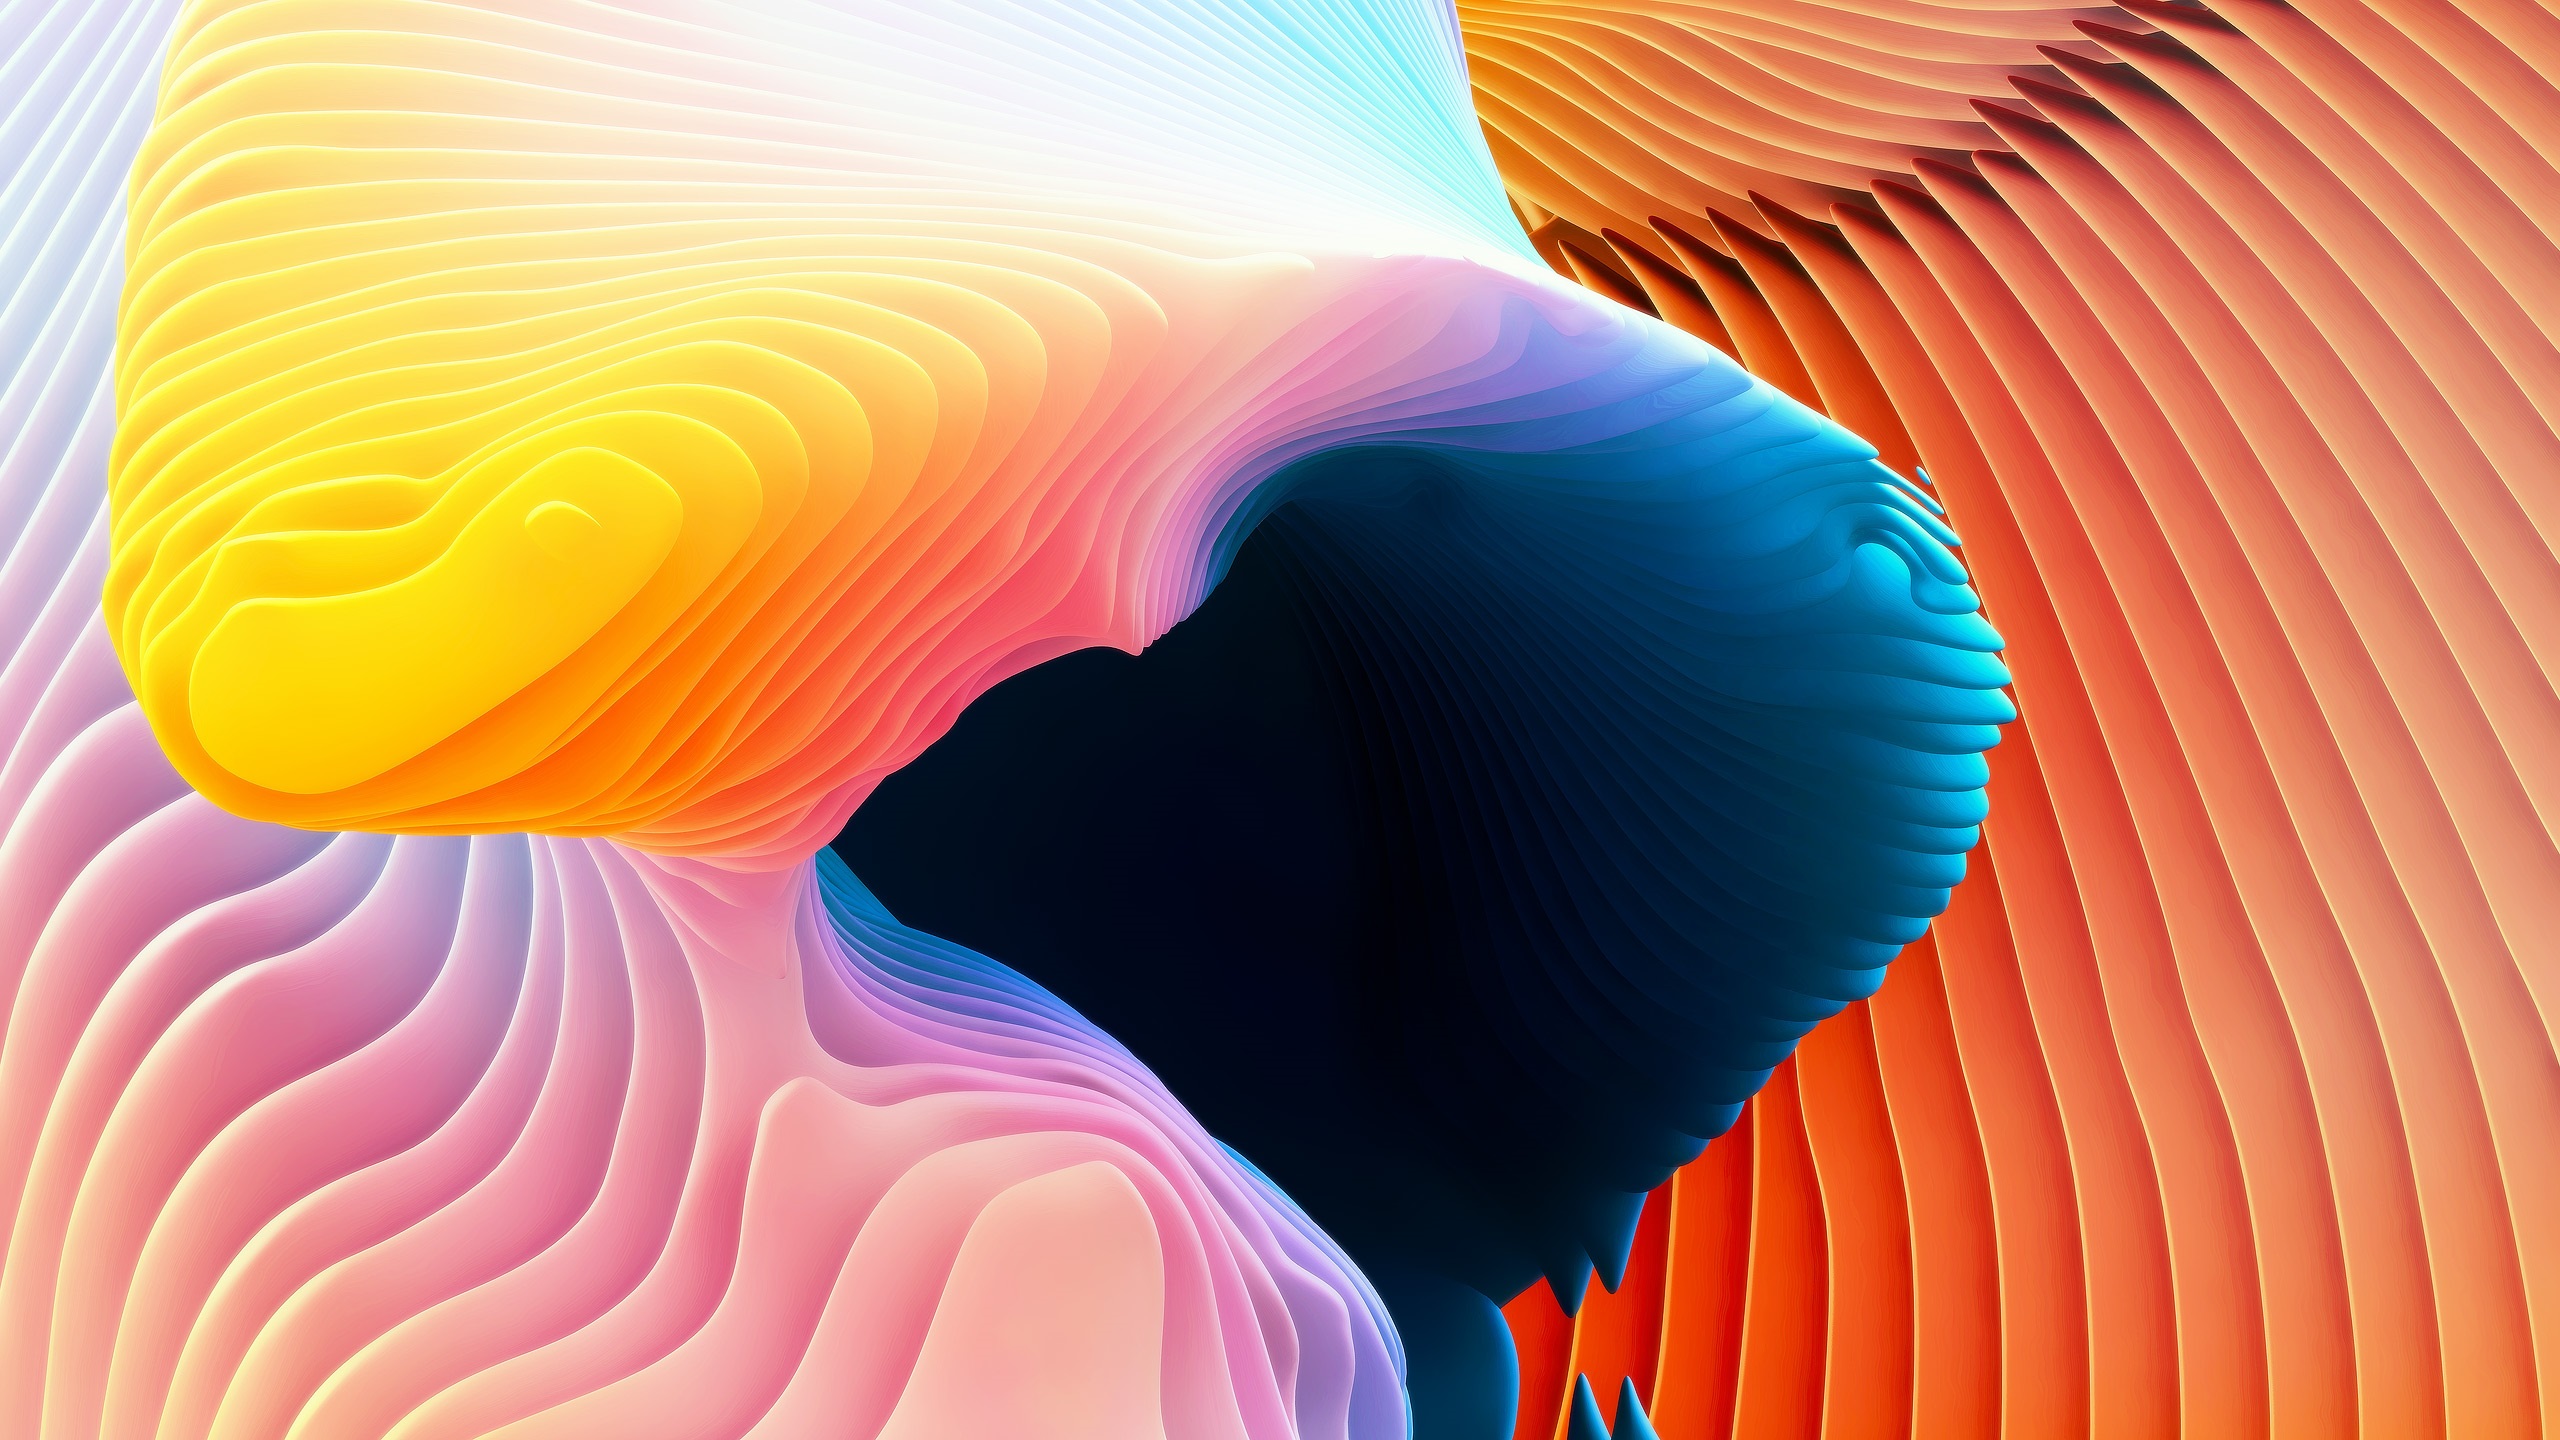 Abstract Spiral Colorful 2560x1440